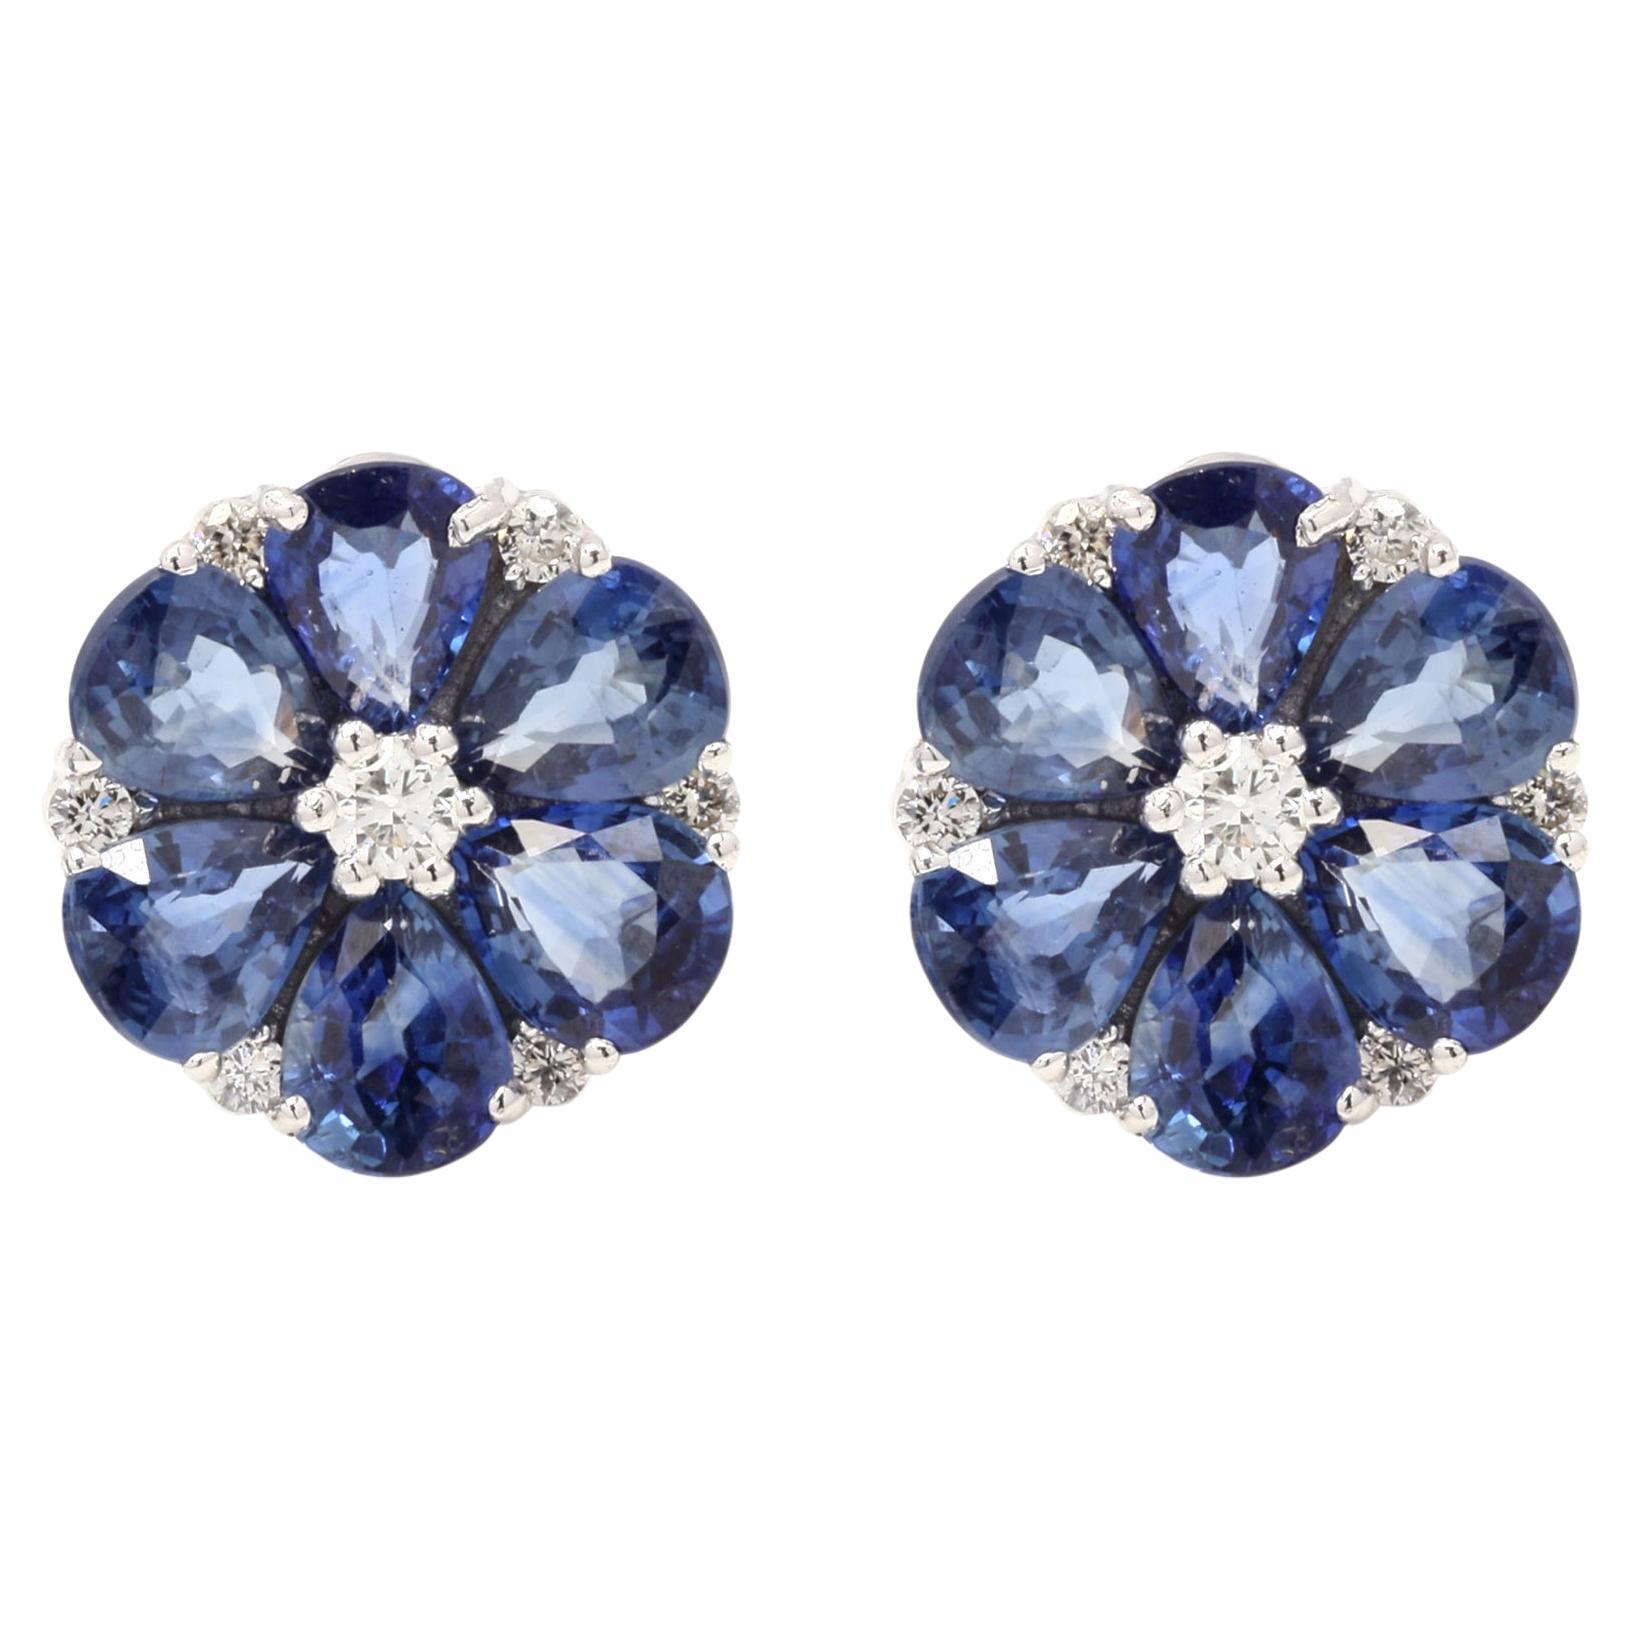 Stunning Floral Diamond and Sapphire Stud Earring Embedded in 18K White Gold For Sale